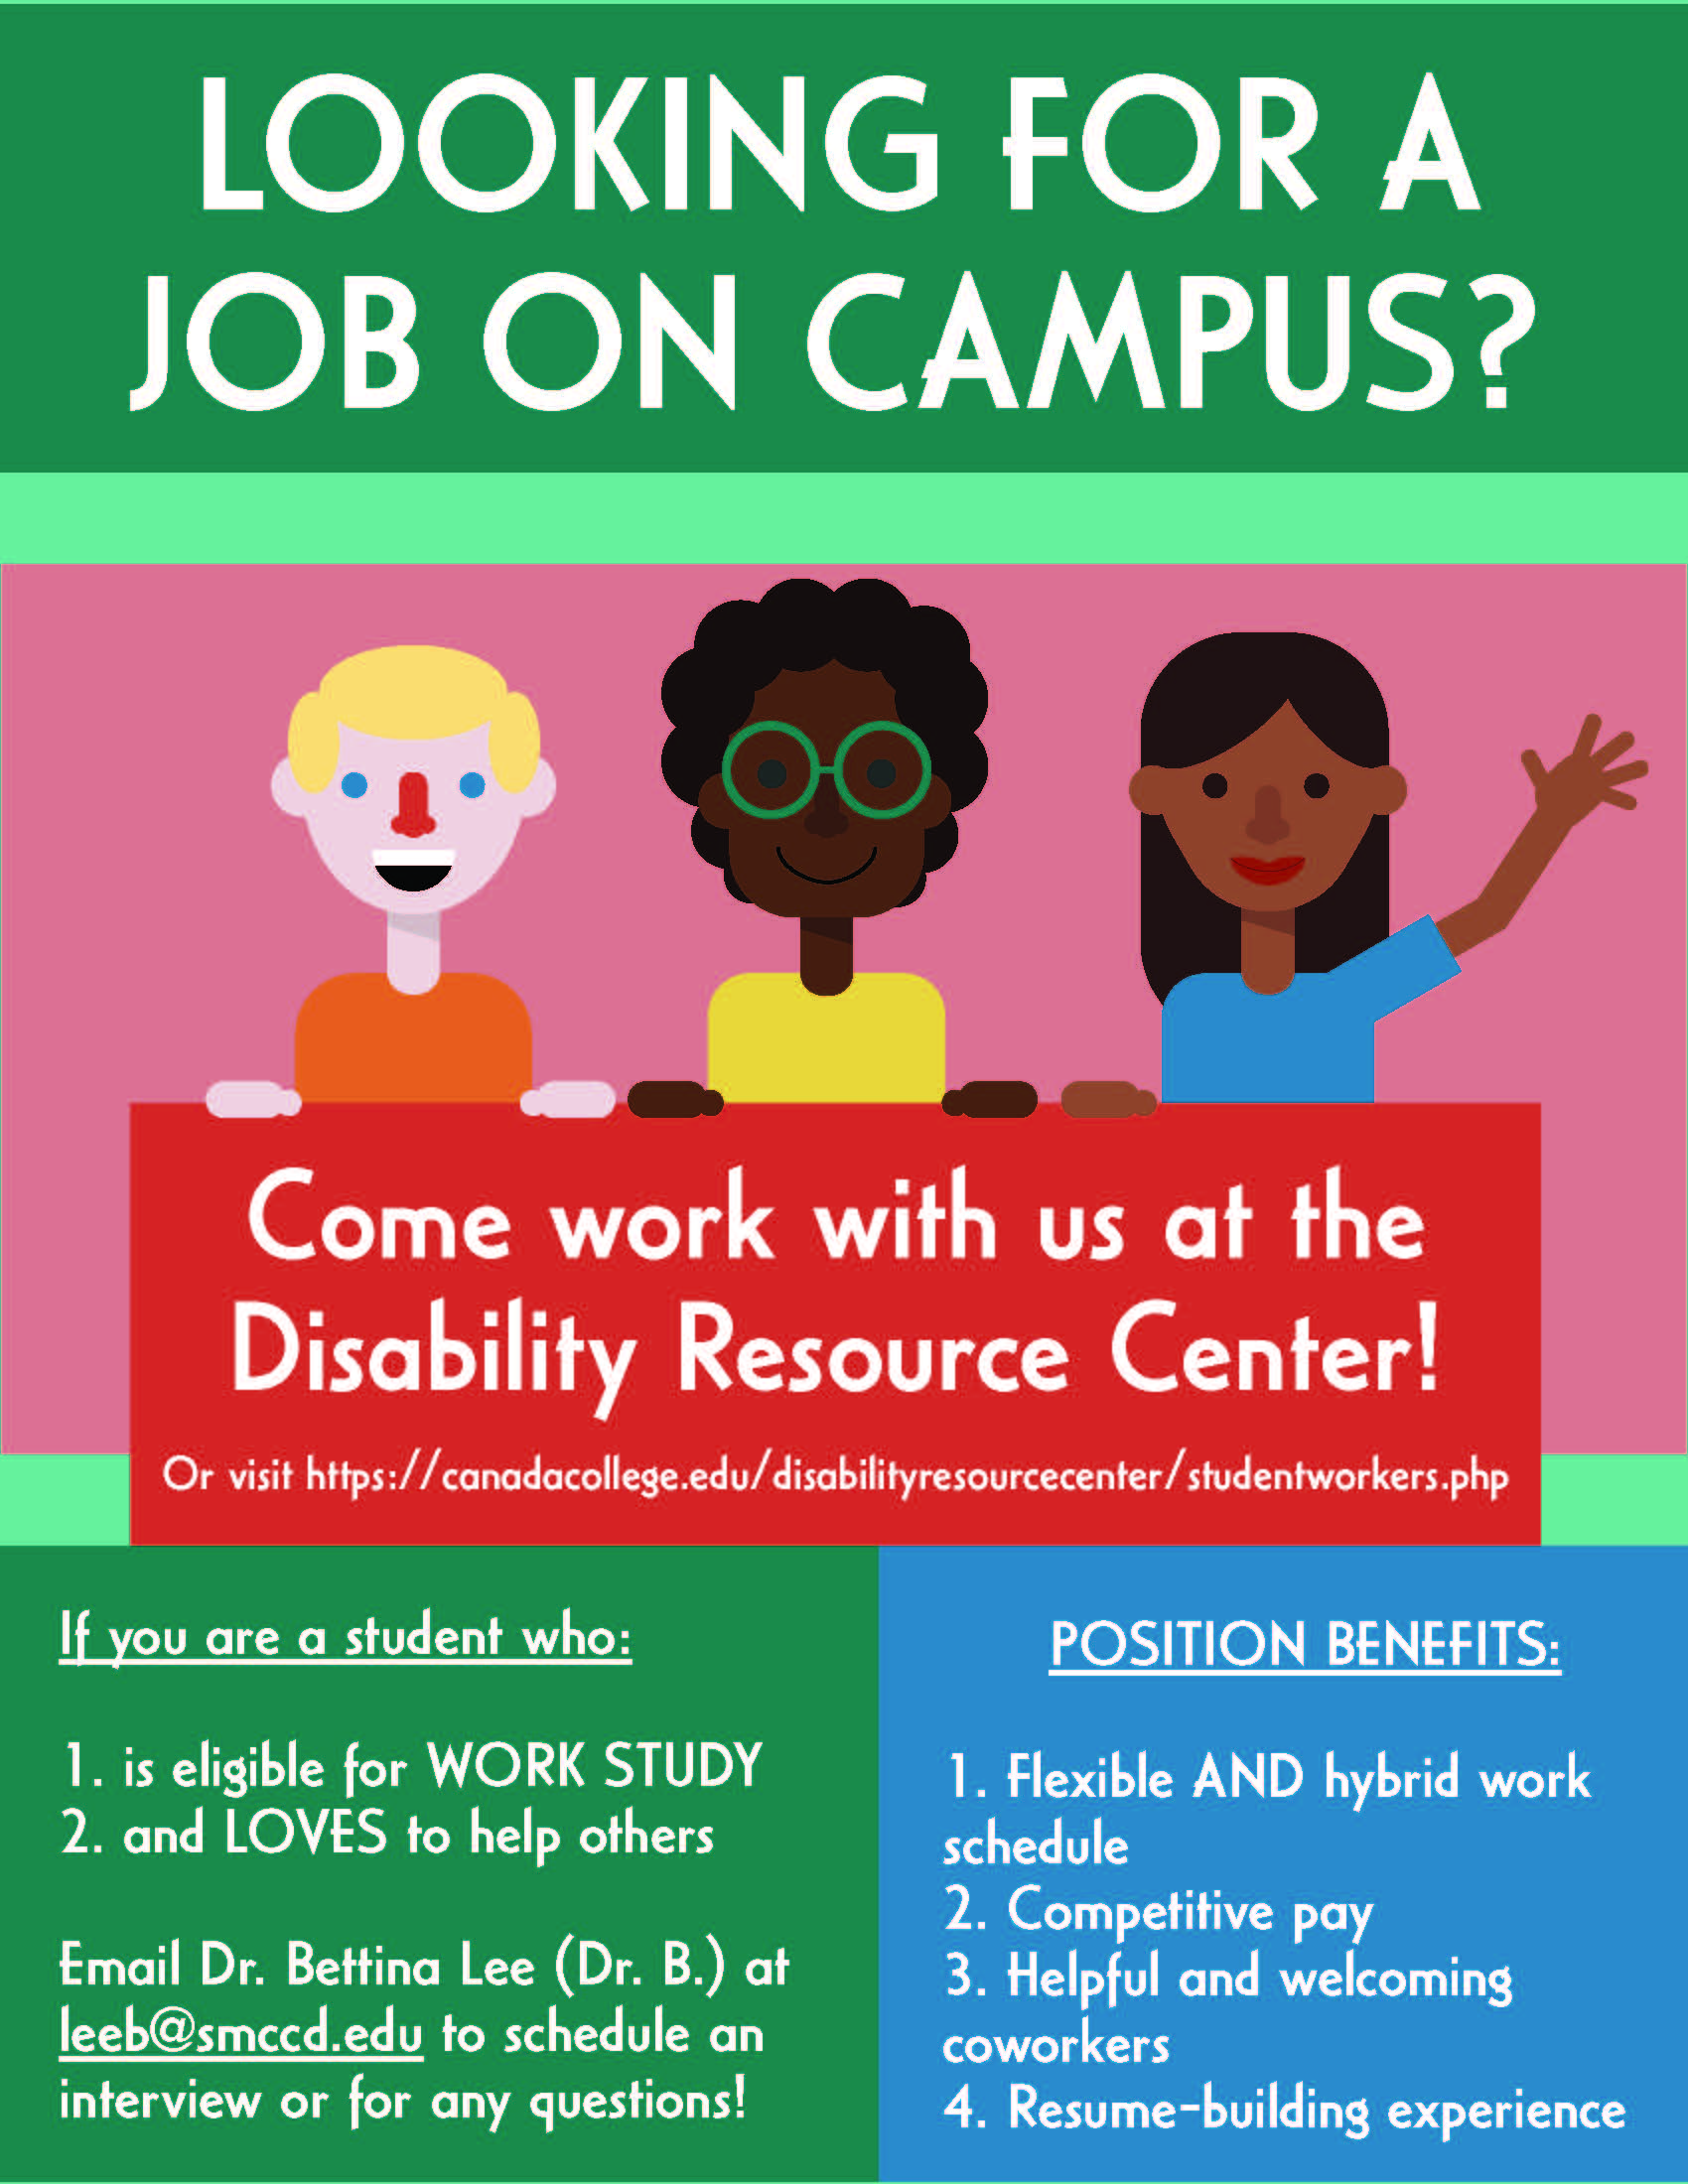 Come work with us at the disability resource center!